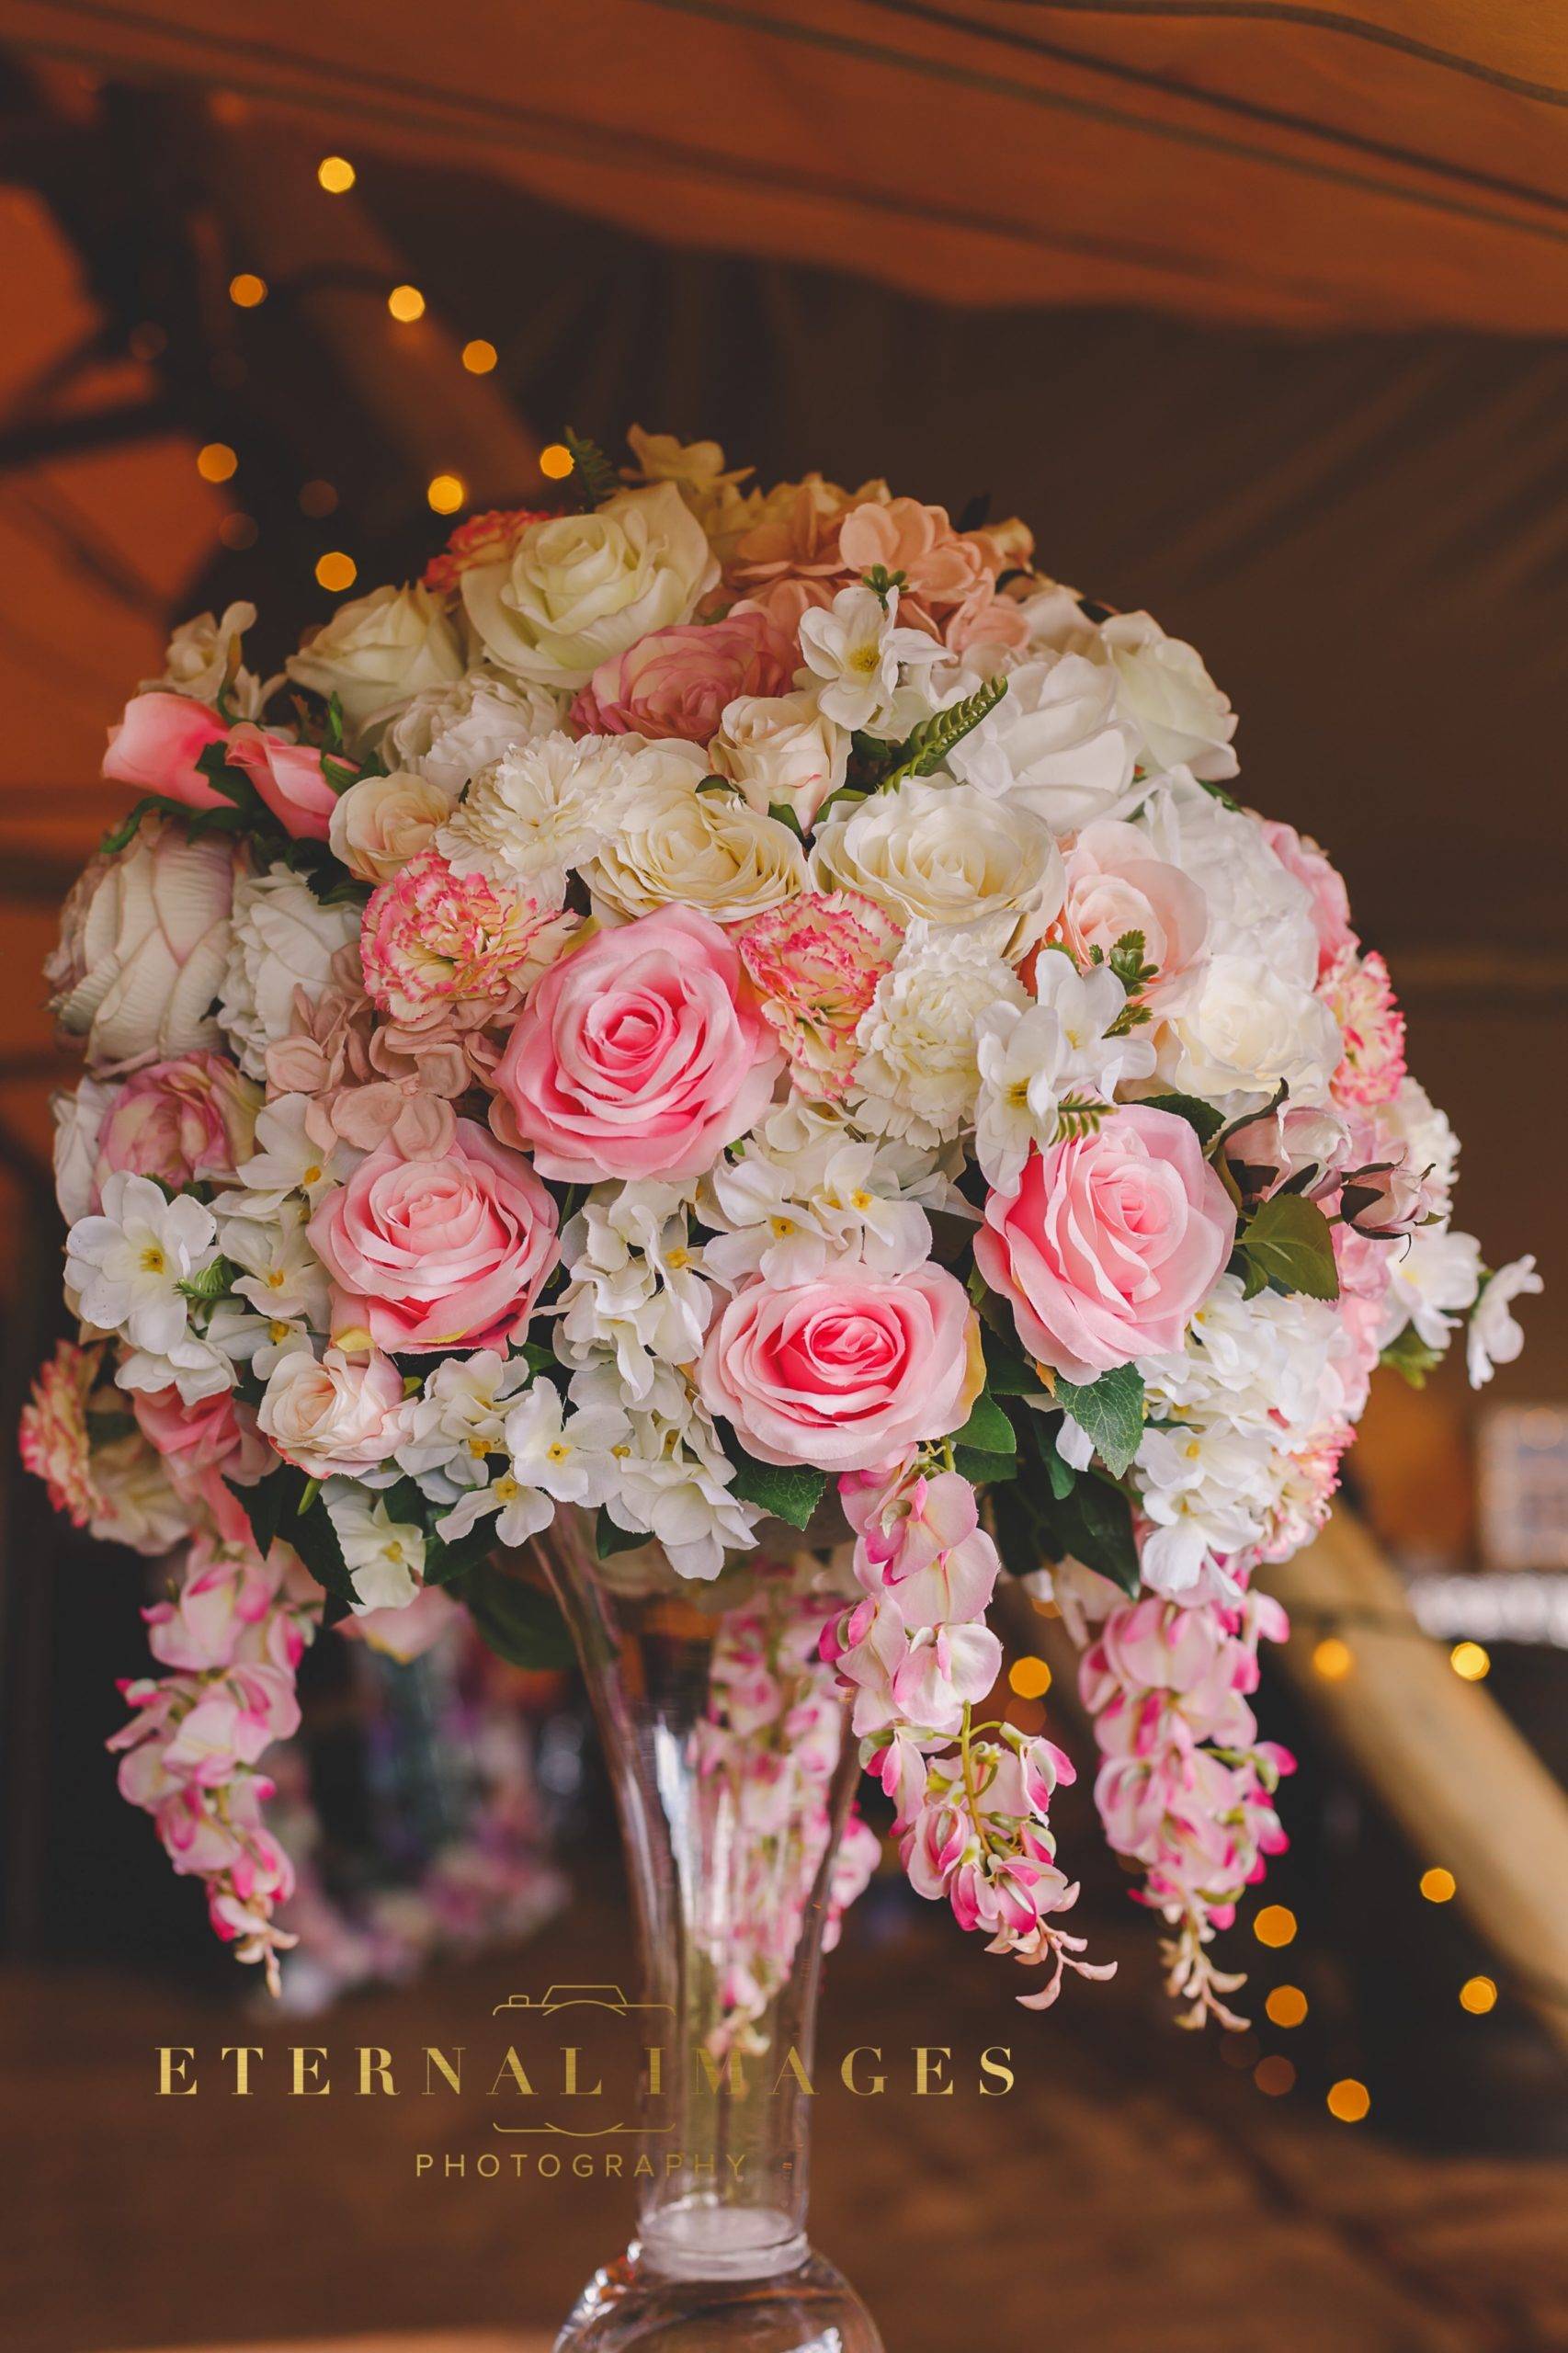 a vase filled with pink and white flowers.